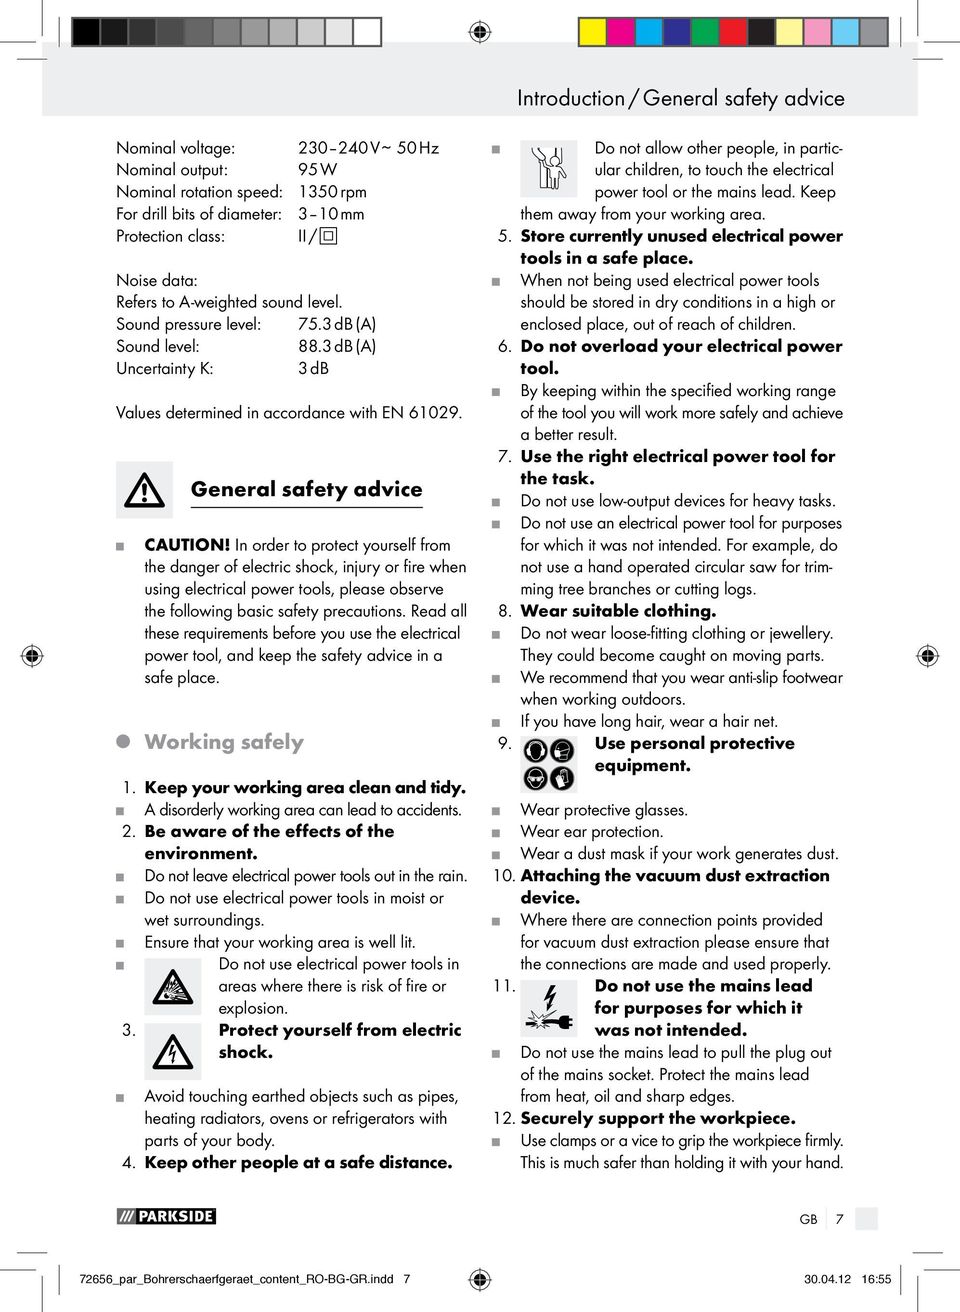 In order to protect yourself from the danger of electric shock, injury or fire when using electrical power tools, please observe the following basic safety precautions.